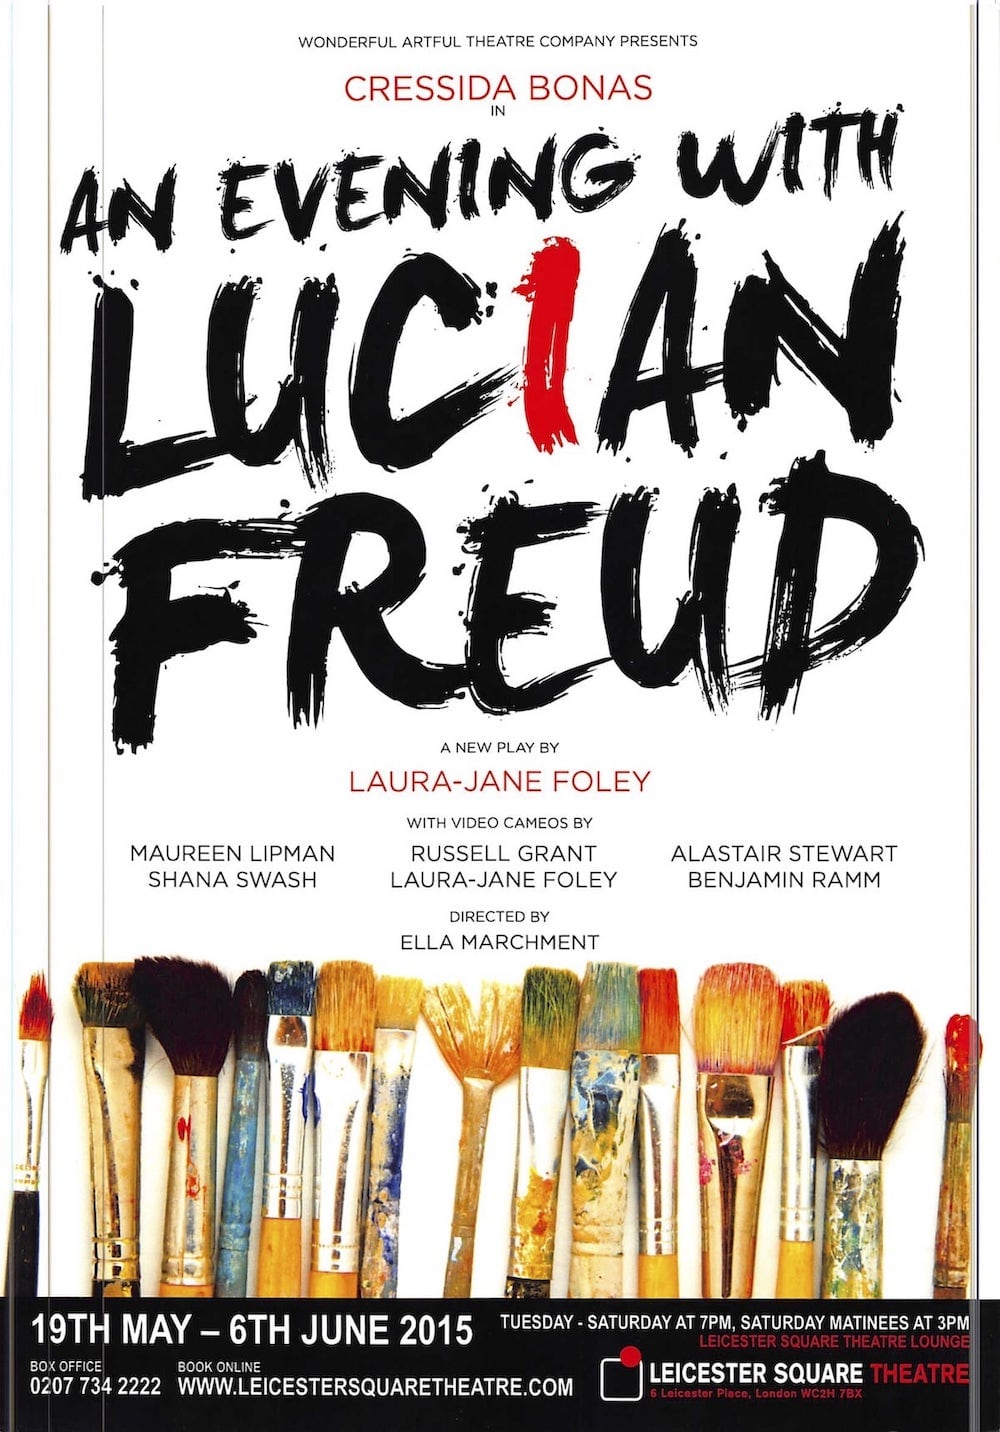 An Evening With Lucian Freud directed by Ella Marchment